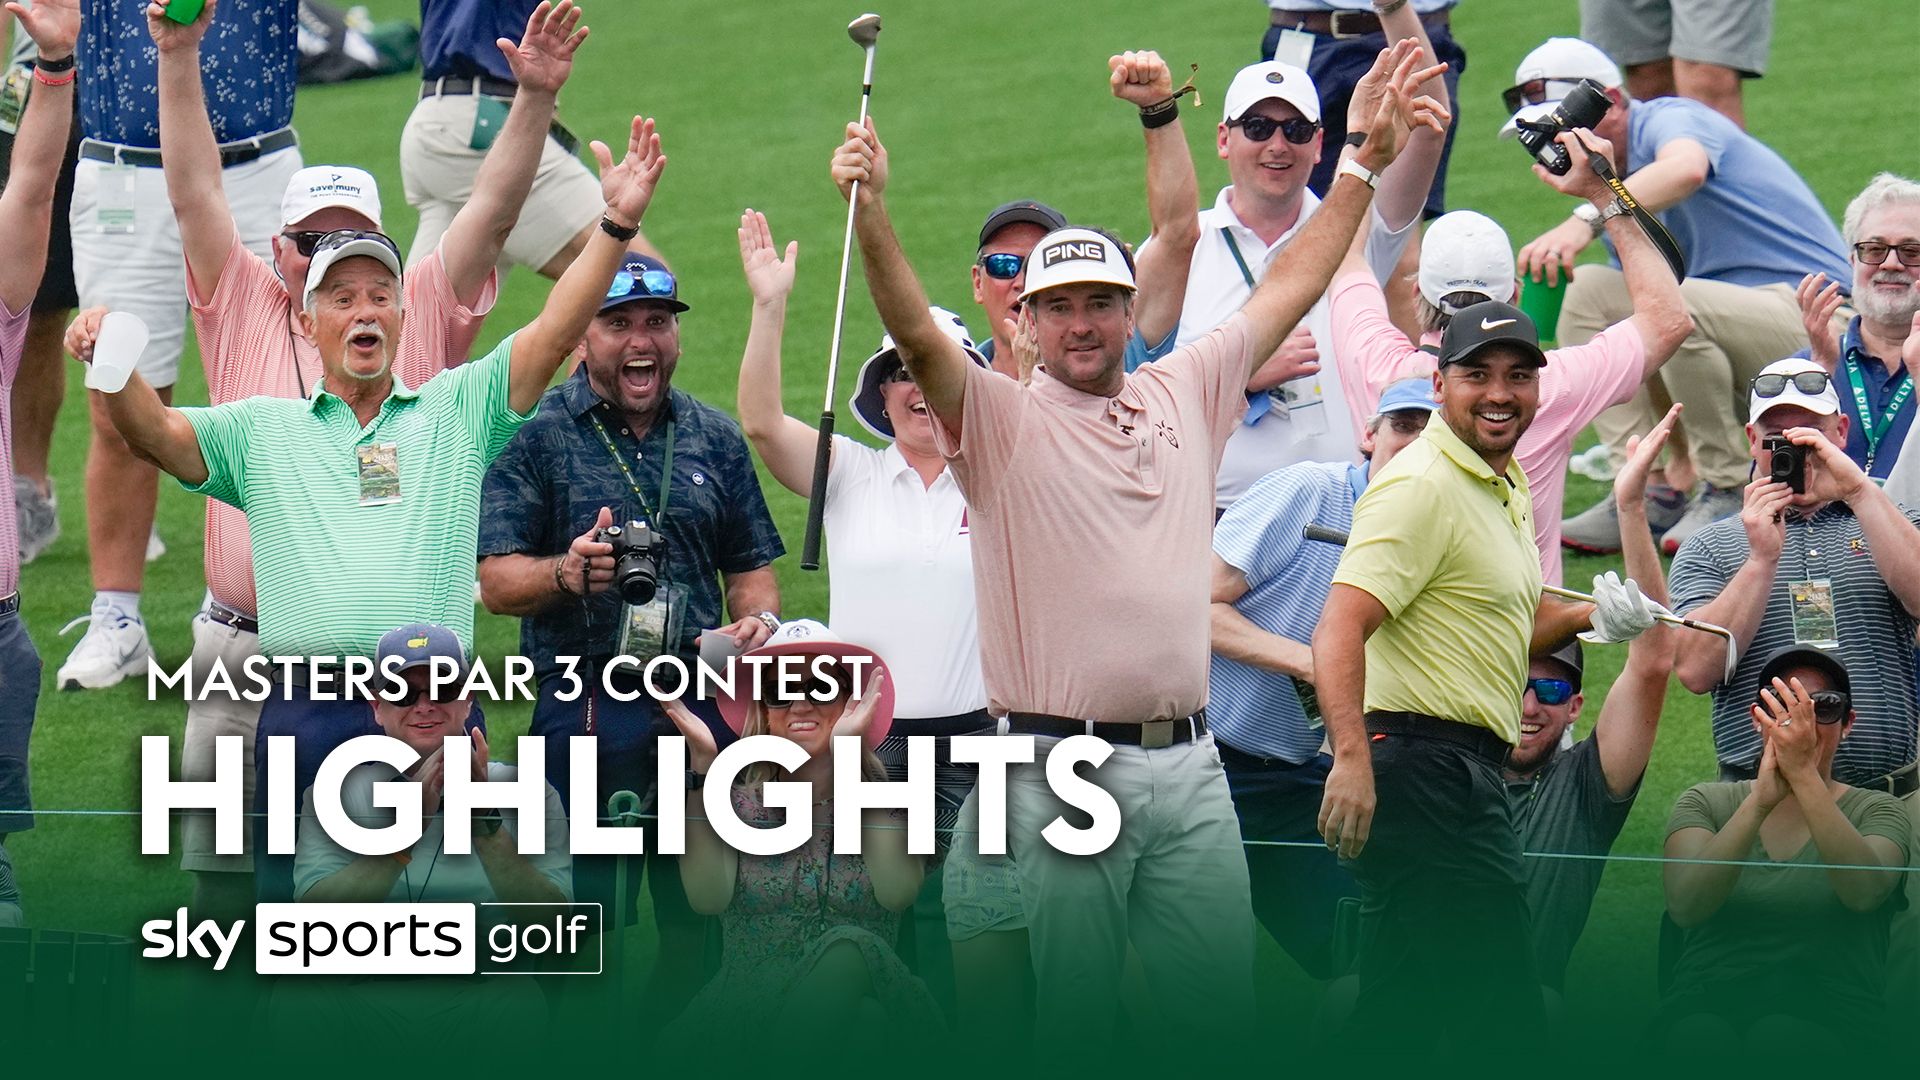 Highlights: Masters Par 3 Contest sees five hole-in-ones!